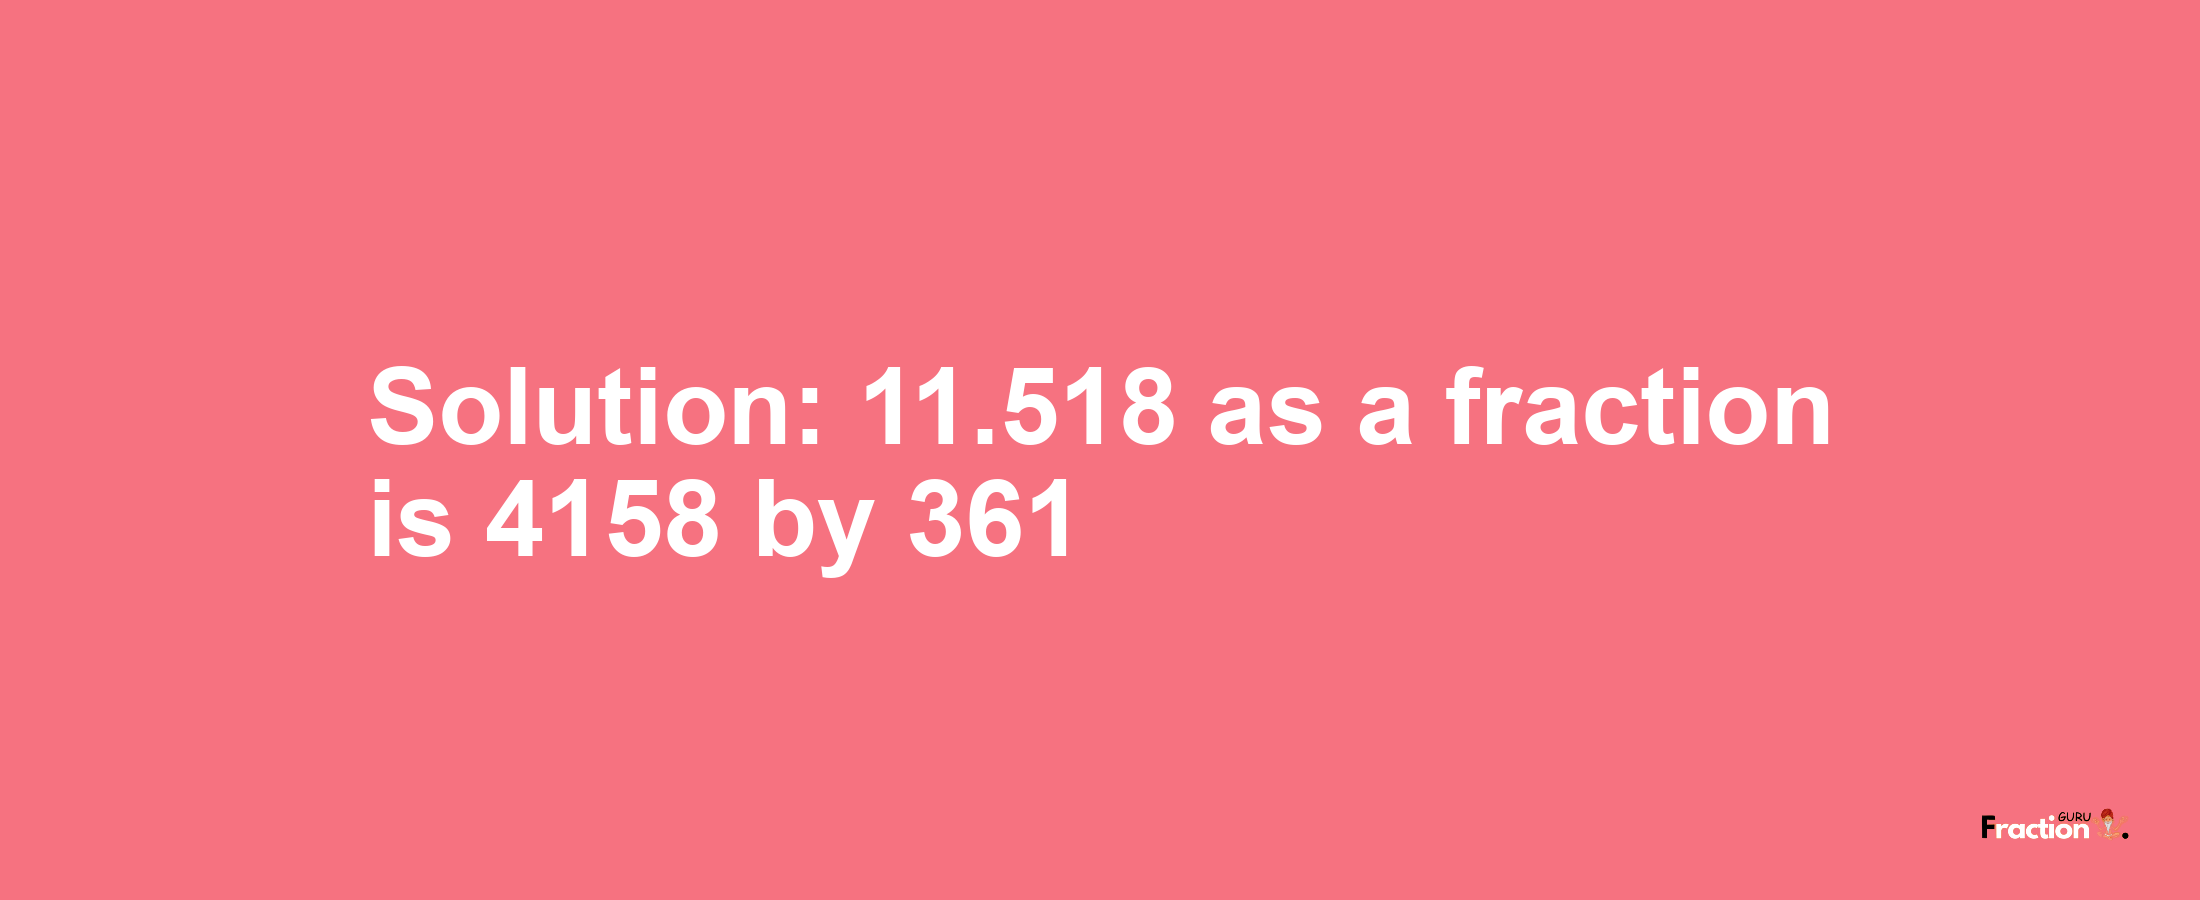 Solution:11.518 as a fraction is 4158/361